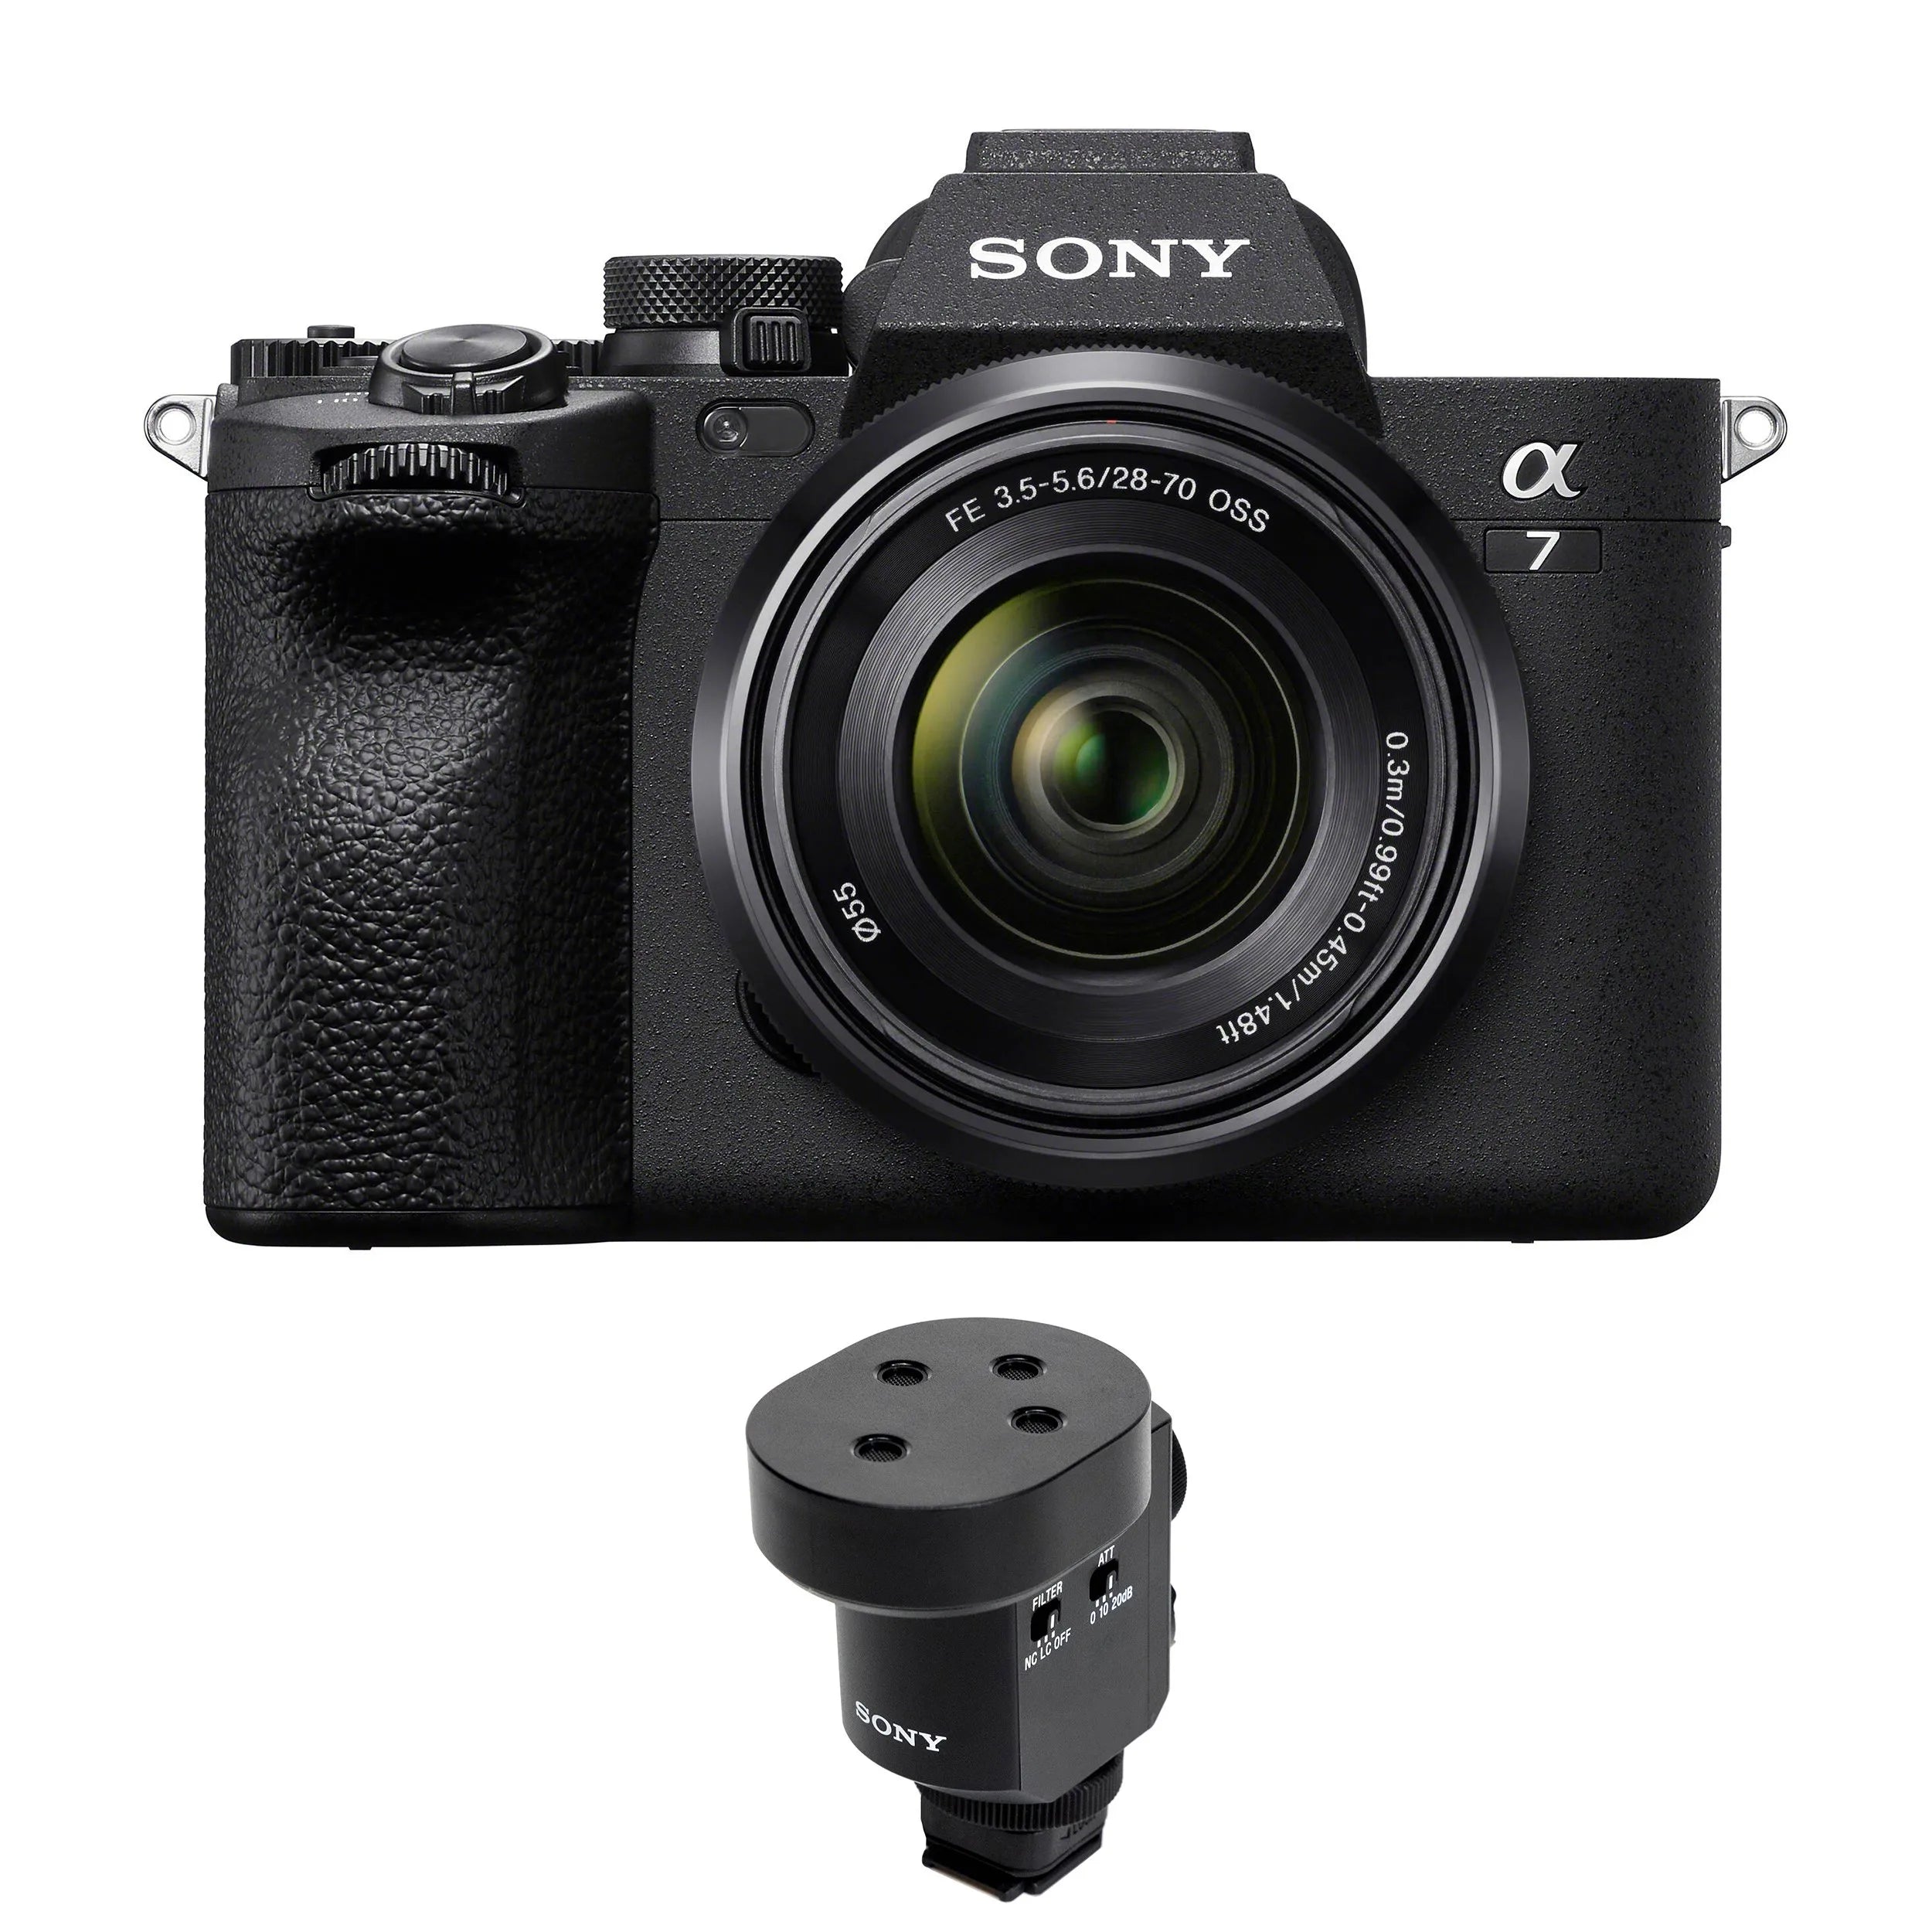 Sony Alpha A7 IV Mirrorless Digital Camera with 28-70mm Lens + Free Microphone